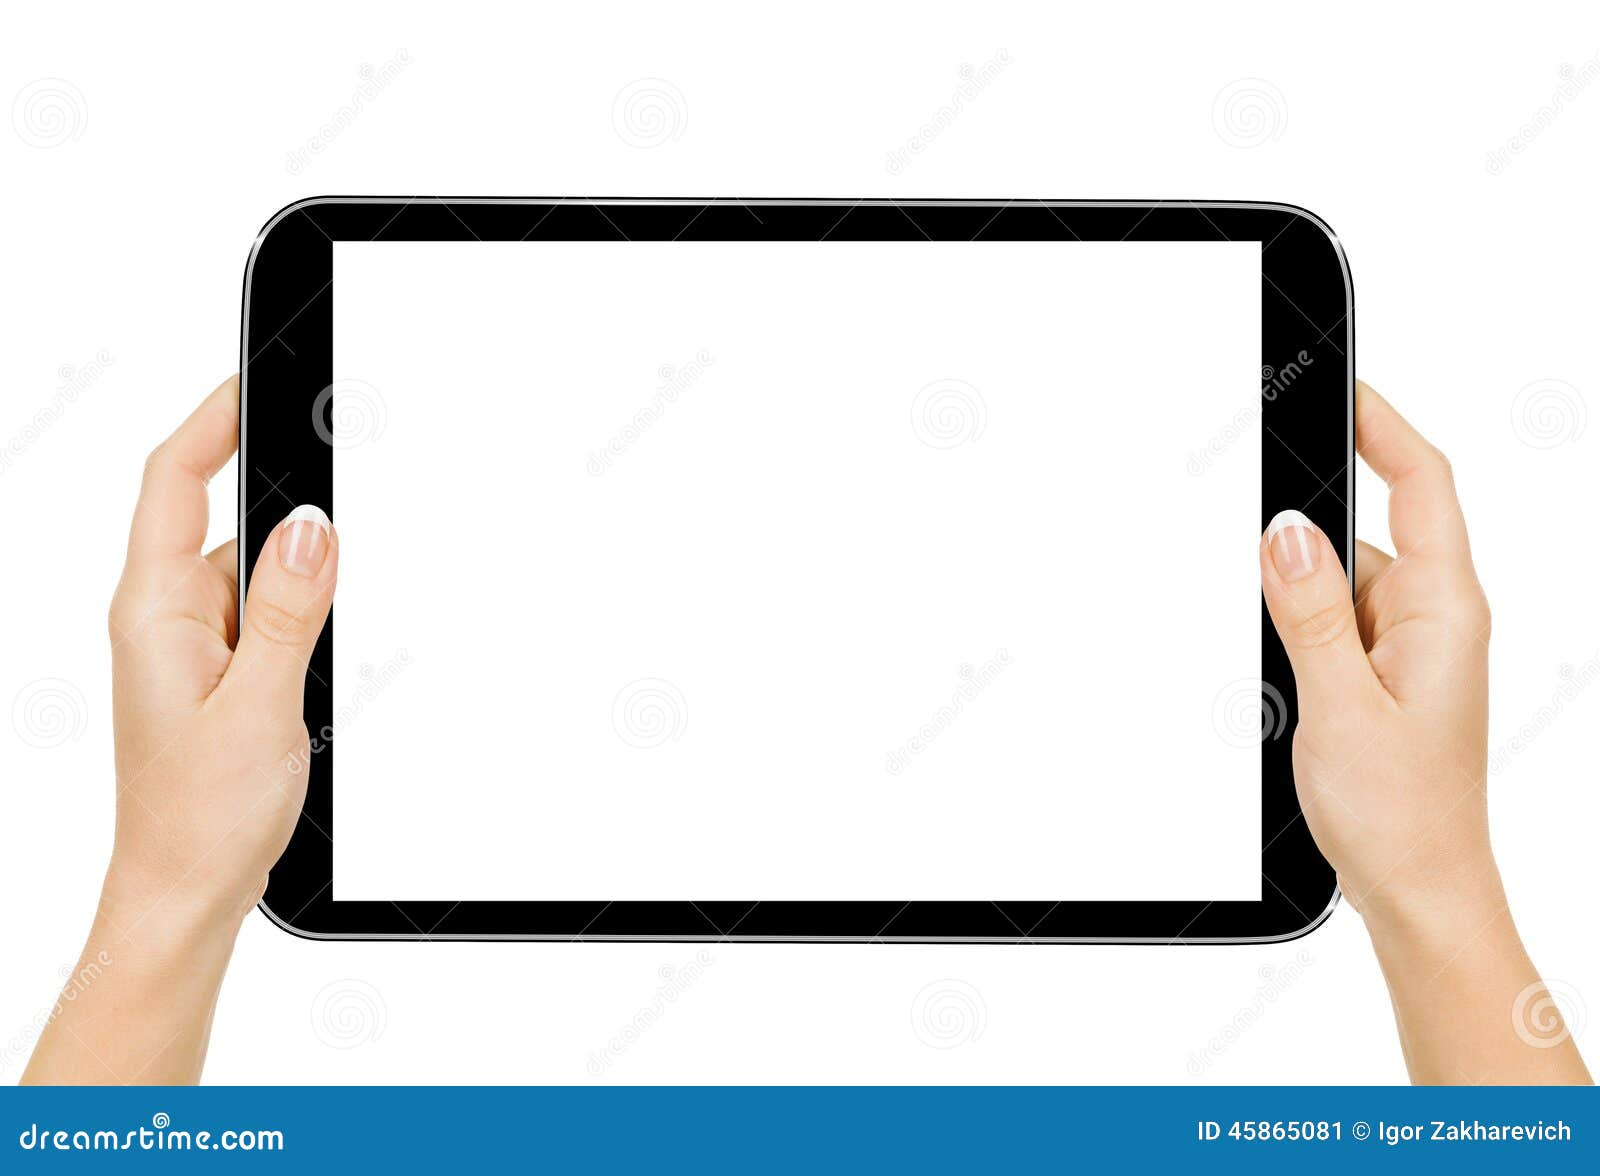 female hands holding a tablet touch computer gadget